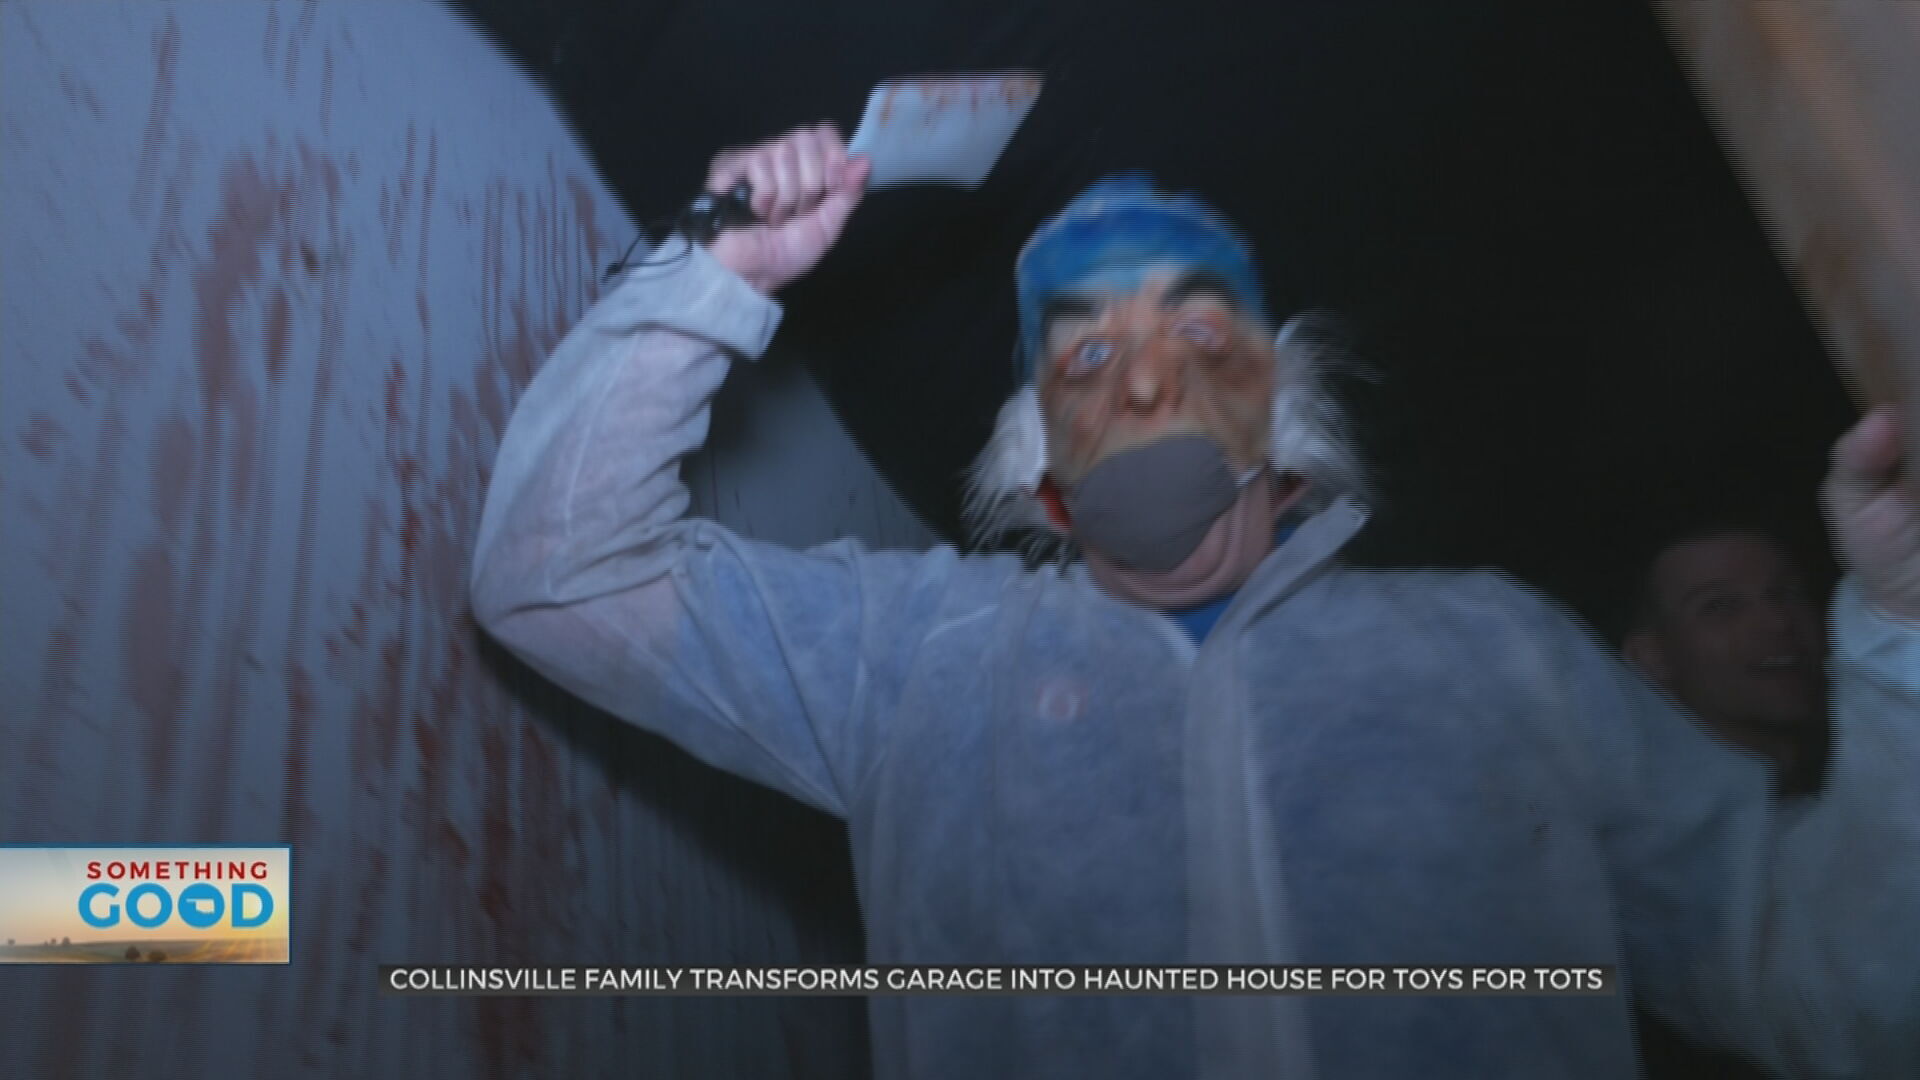 Collinsville Family Transforms Garage Into Haunted House For Toys For Tots 